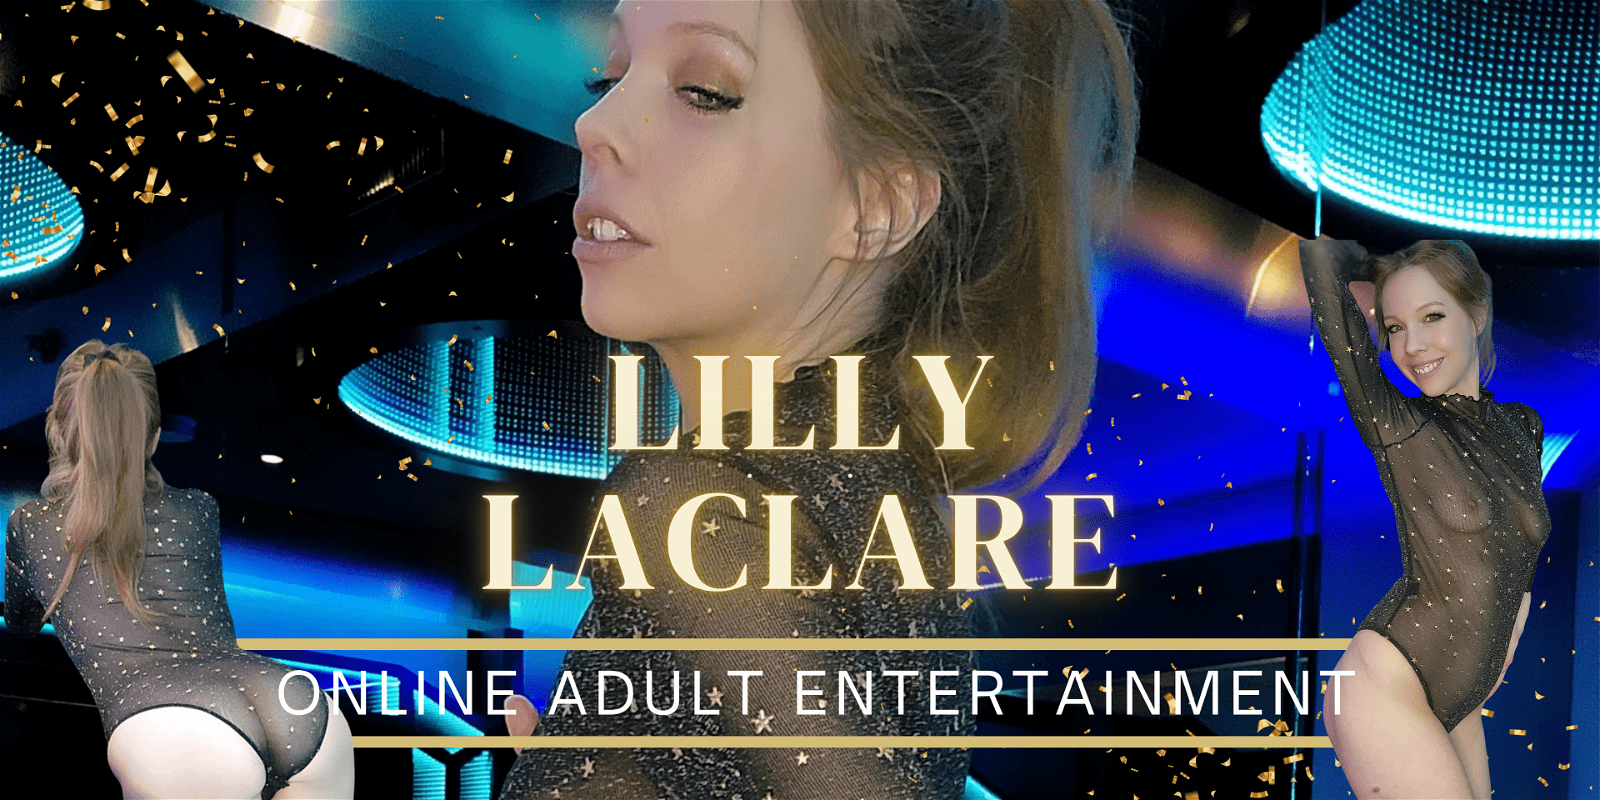 Cover photo of LillyLaclare